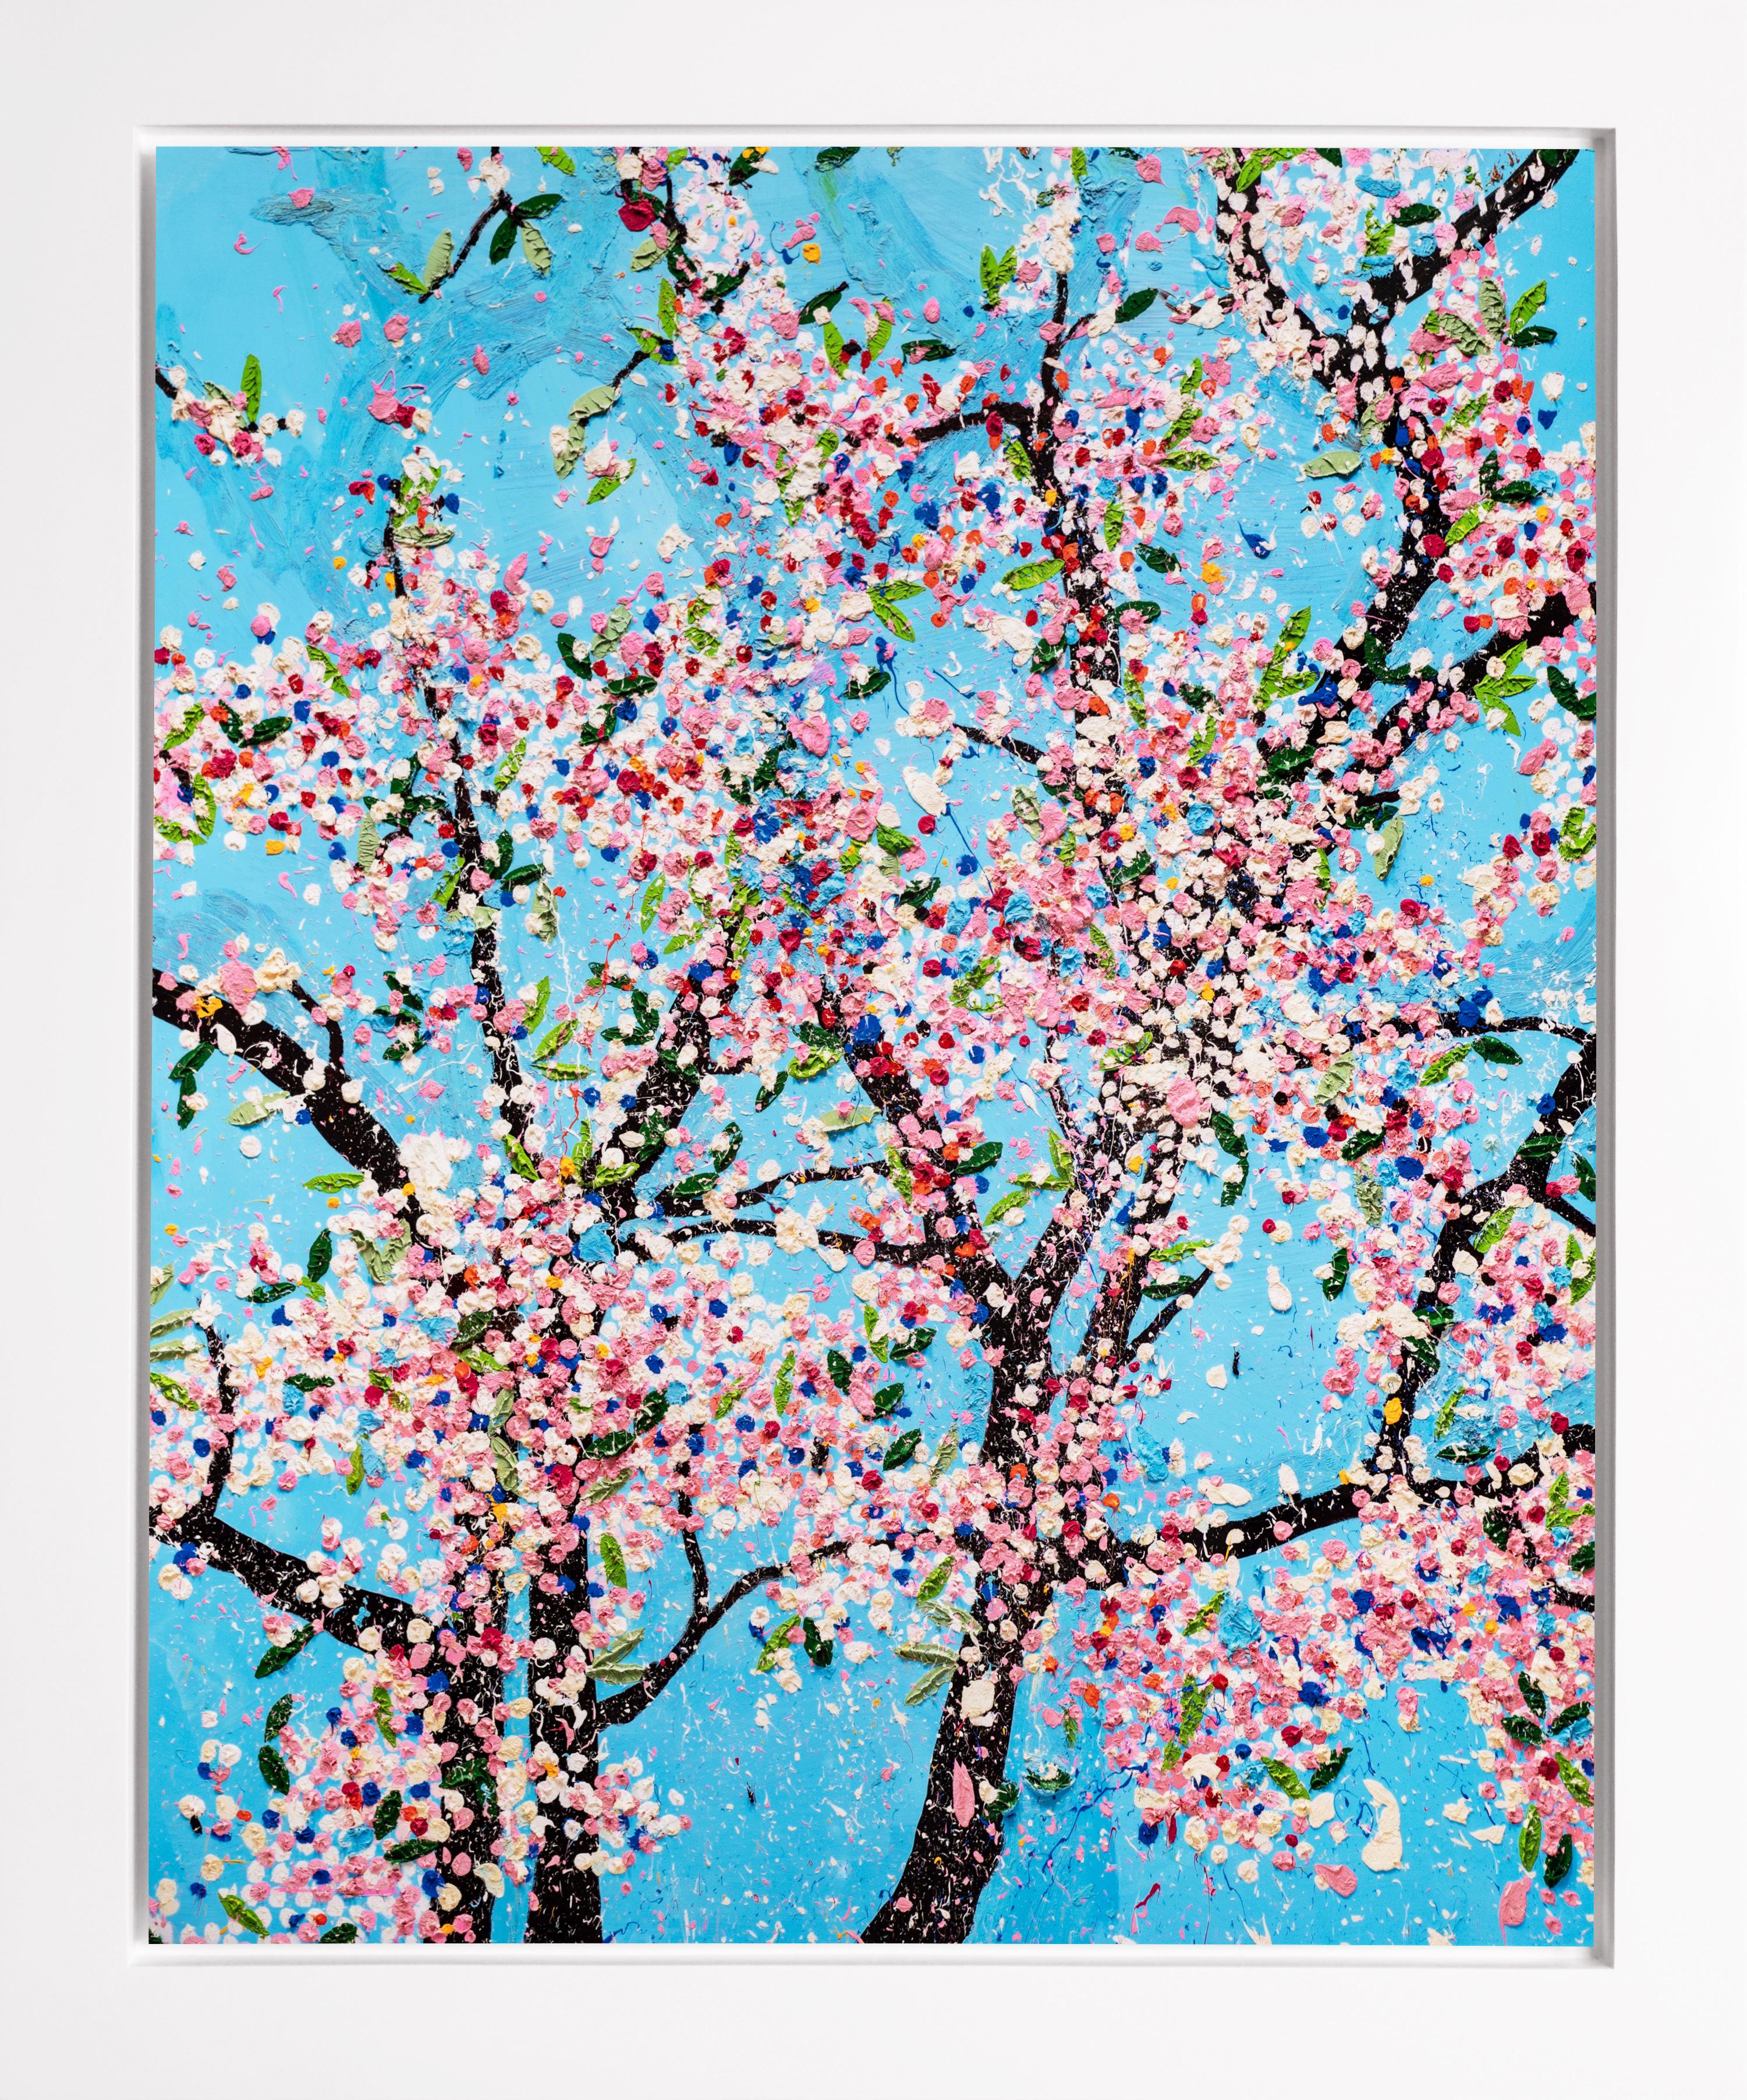 Damien Hirst Abstract Print - The Virtues 'Politeness', Limited Edition 'Cherry Blossom' Landscape